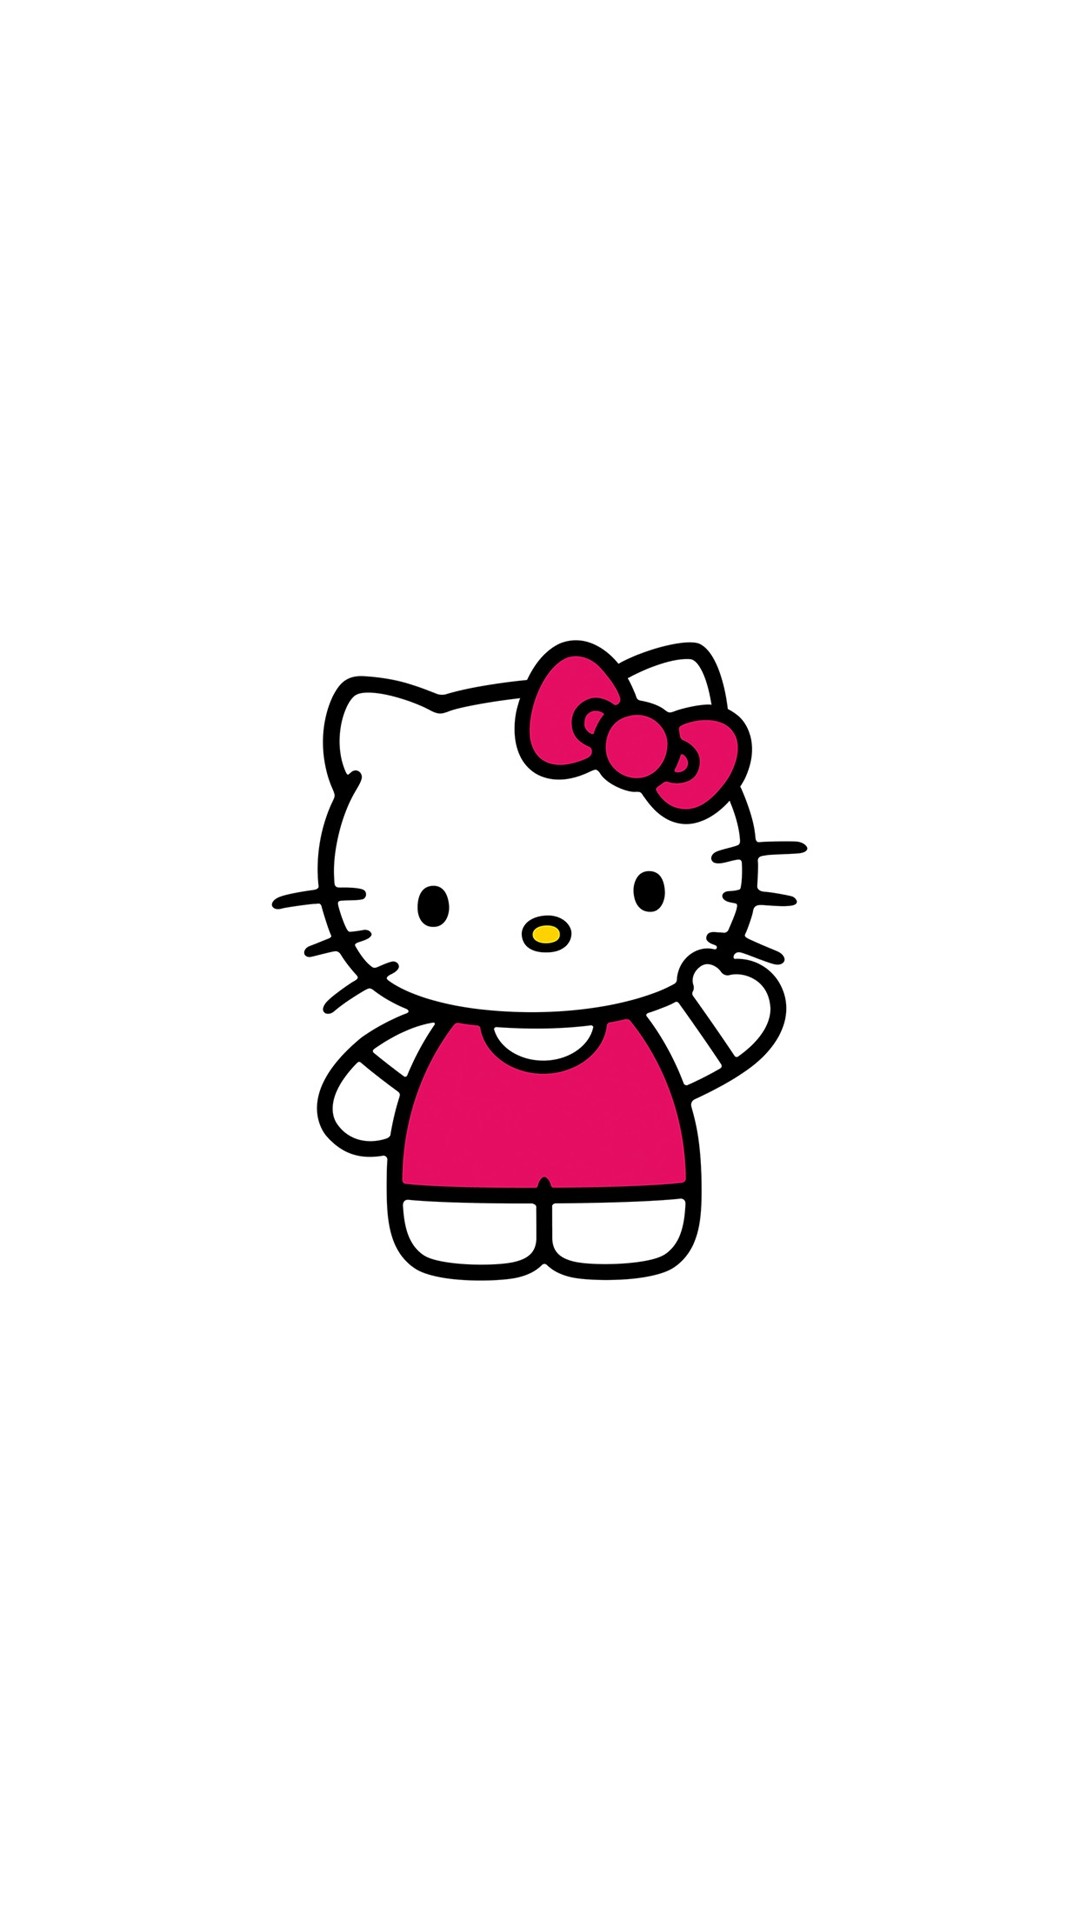 1920x1080 hello kitty wallpapers 1280x800 1440x900 1680x1050 1920x1200 download